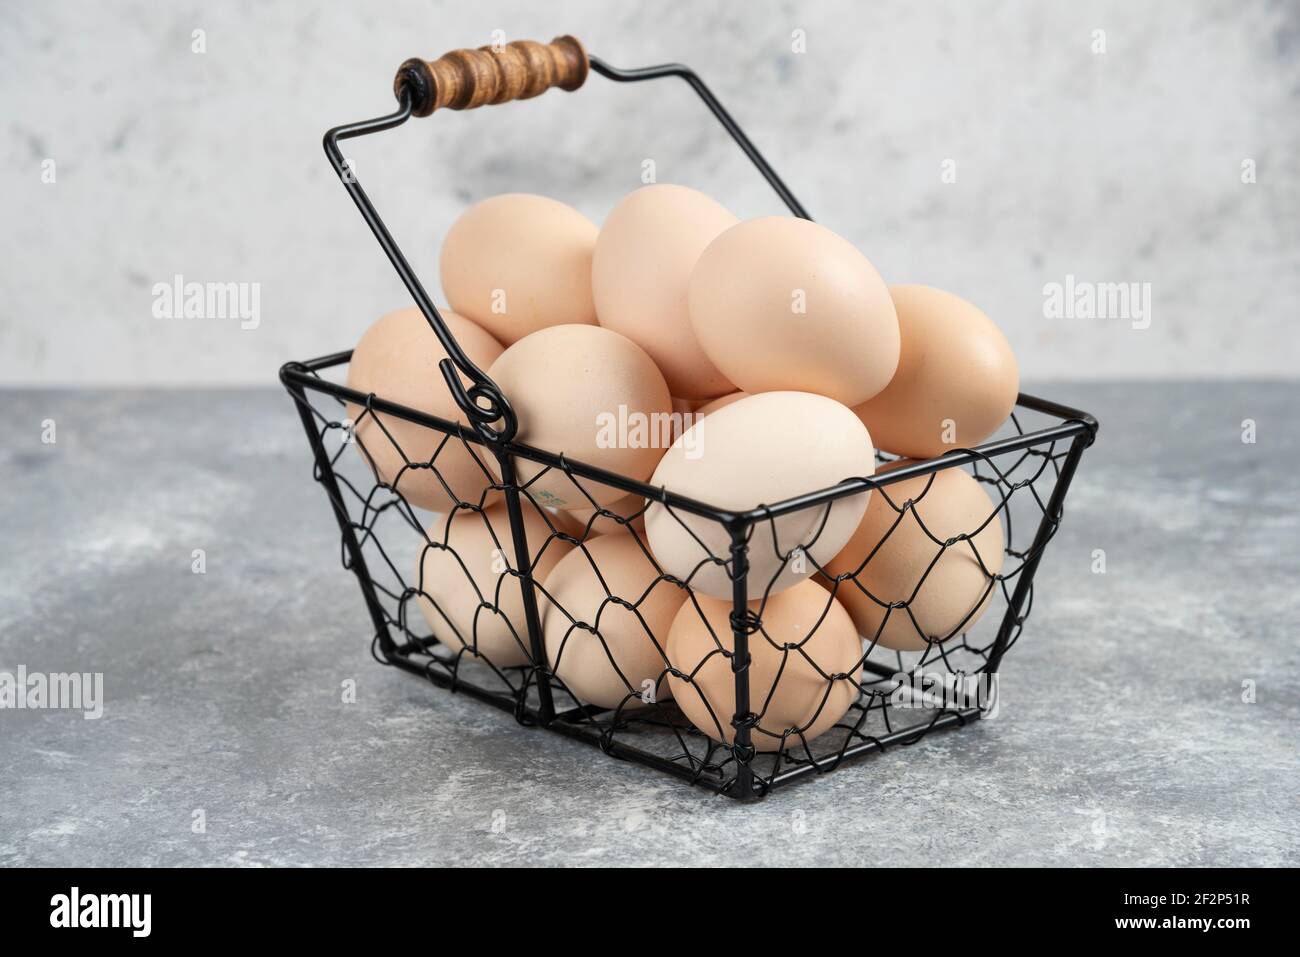 Metal basket of organic fresh uncooked eggs placed on marble surface Stock Photo